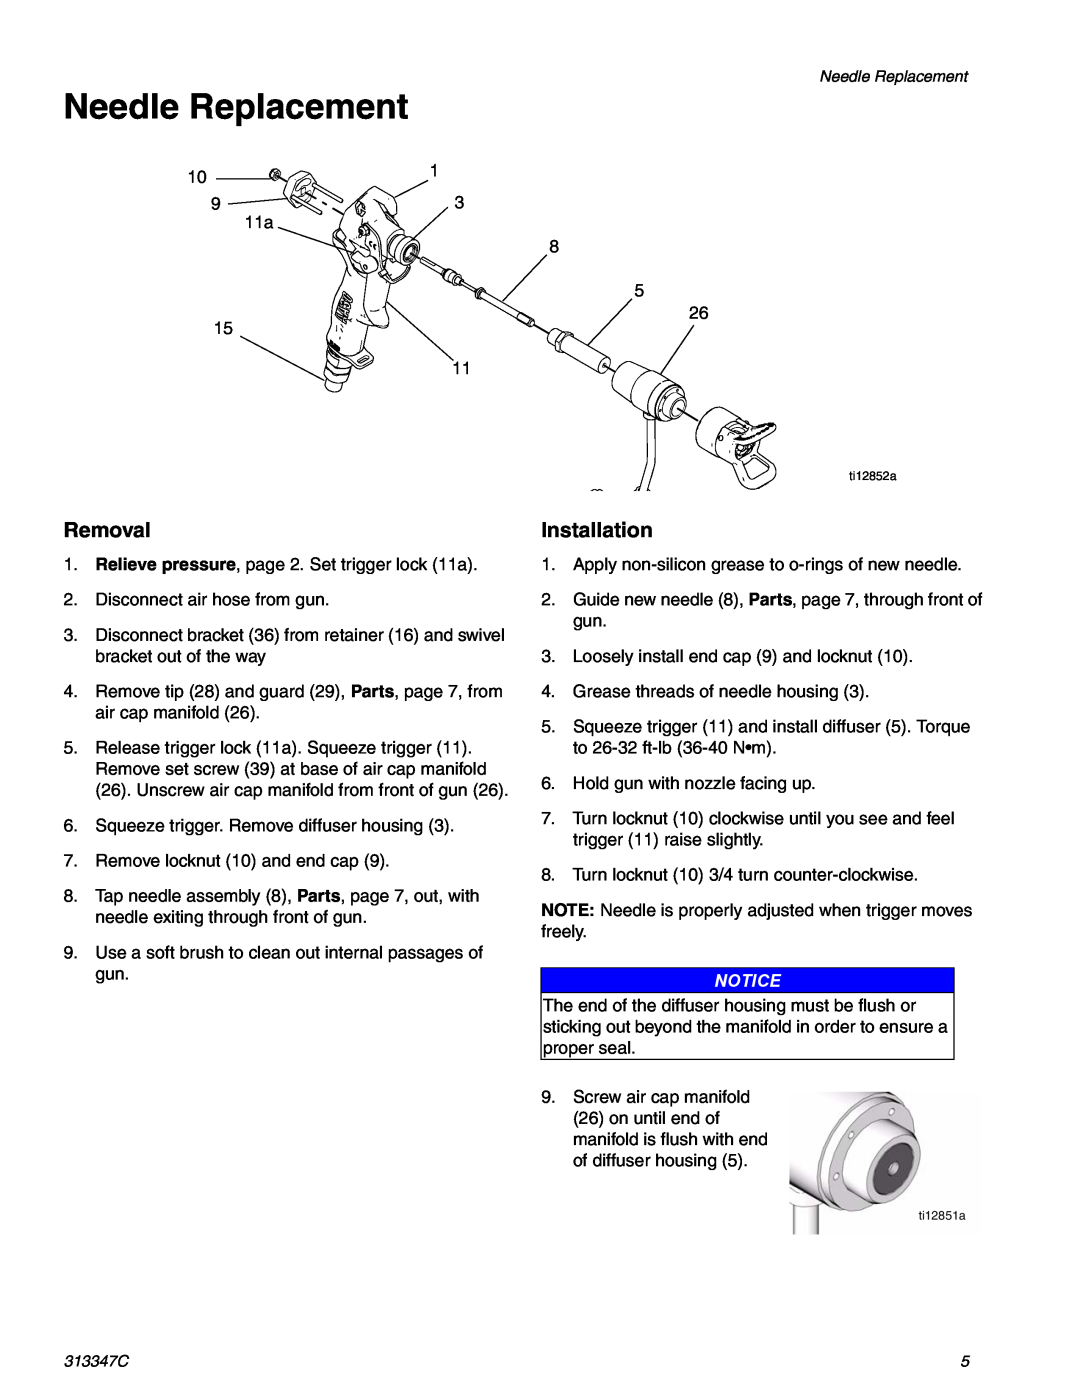 Graco Inc 313347C, AA30, 257096, 257380 important safety instructions Needle Replacement, Removal, Installation 